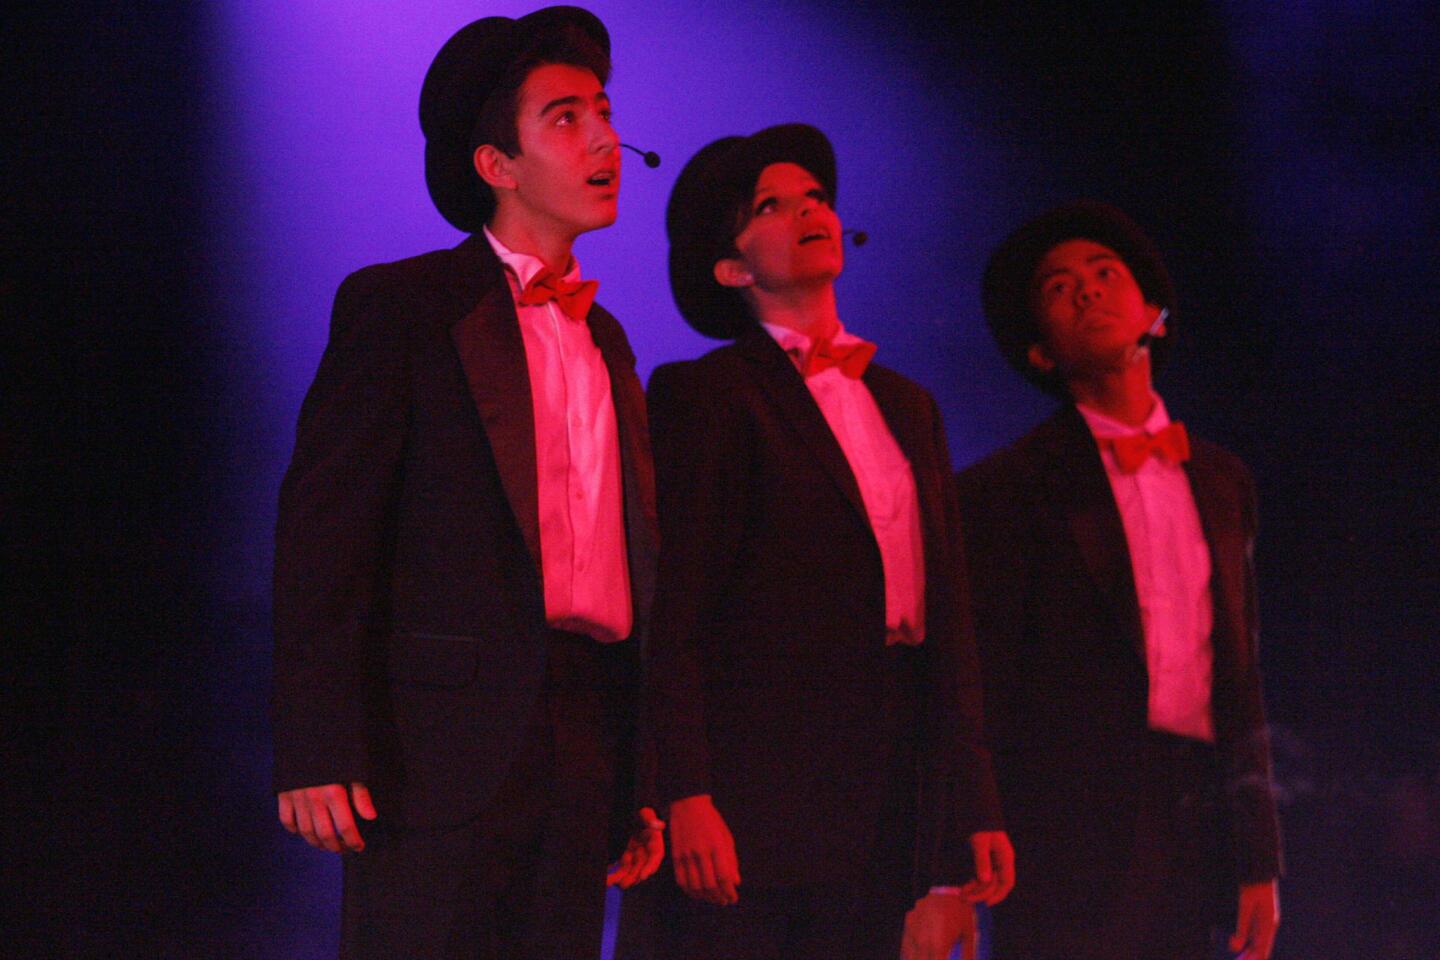 Nick Nikoian, from left, Samantha Rubin and Marvin de la Cruz perform onstage during a John Burroughs High School Vocal Music Assn. performance, "Burroughs on Broadway," which took place at John Burroughs High School in Burbank on Friday, October 12, 2012.